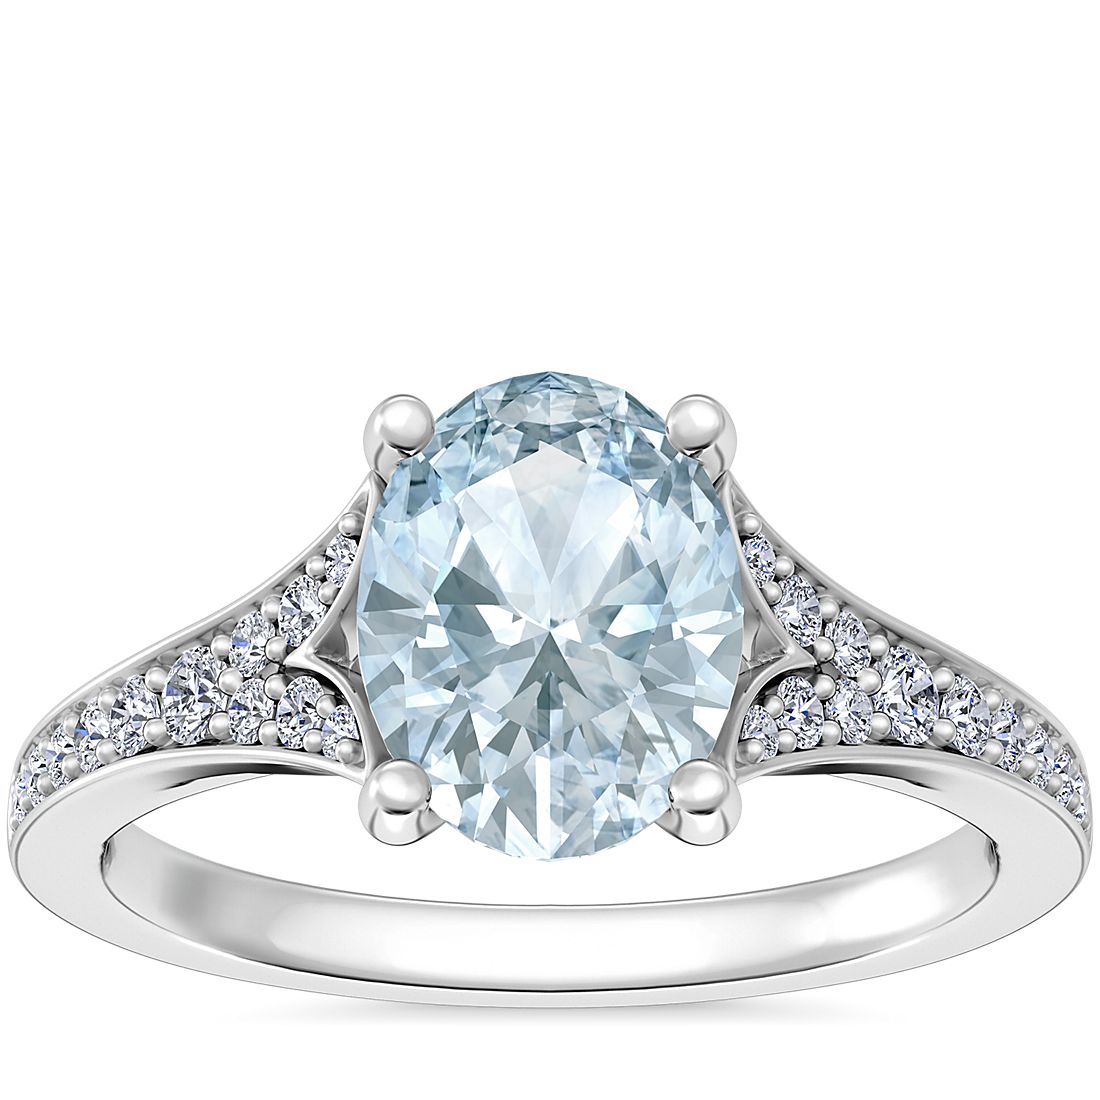 Petite Split Shank Pavé Cathedral Engagement Ring with Oval Aquamarine in Platinum (8x6mm)